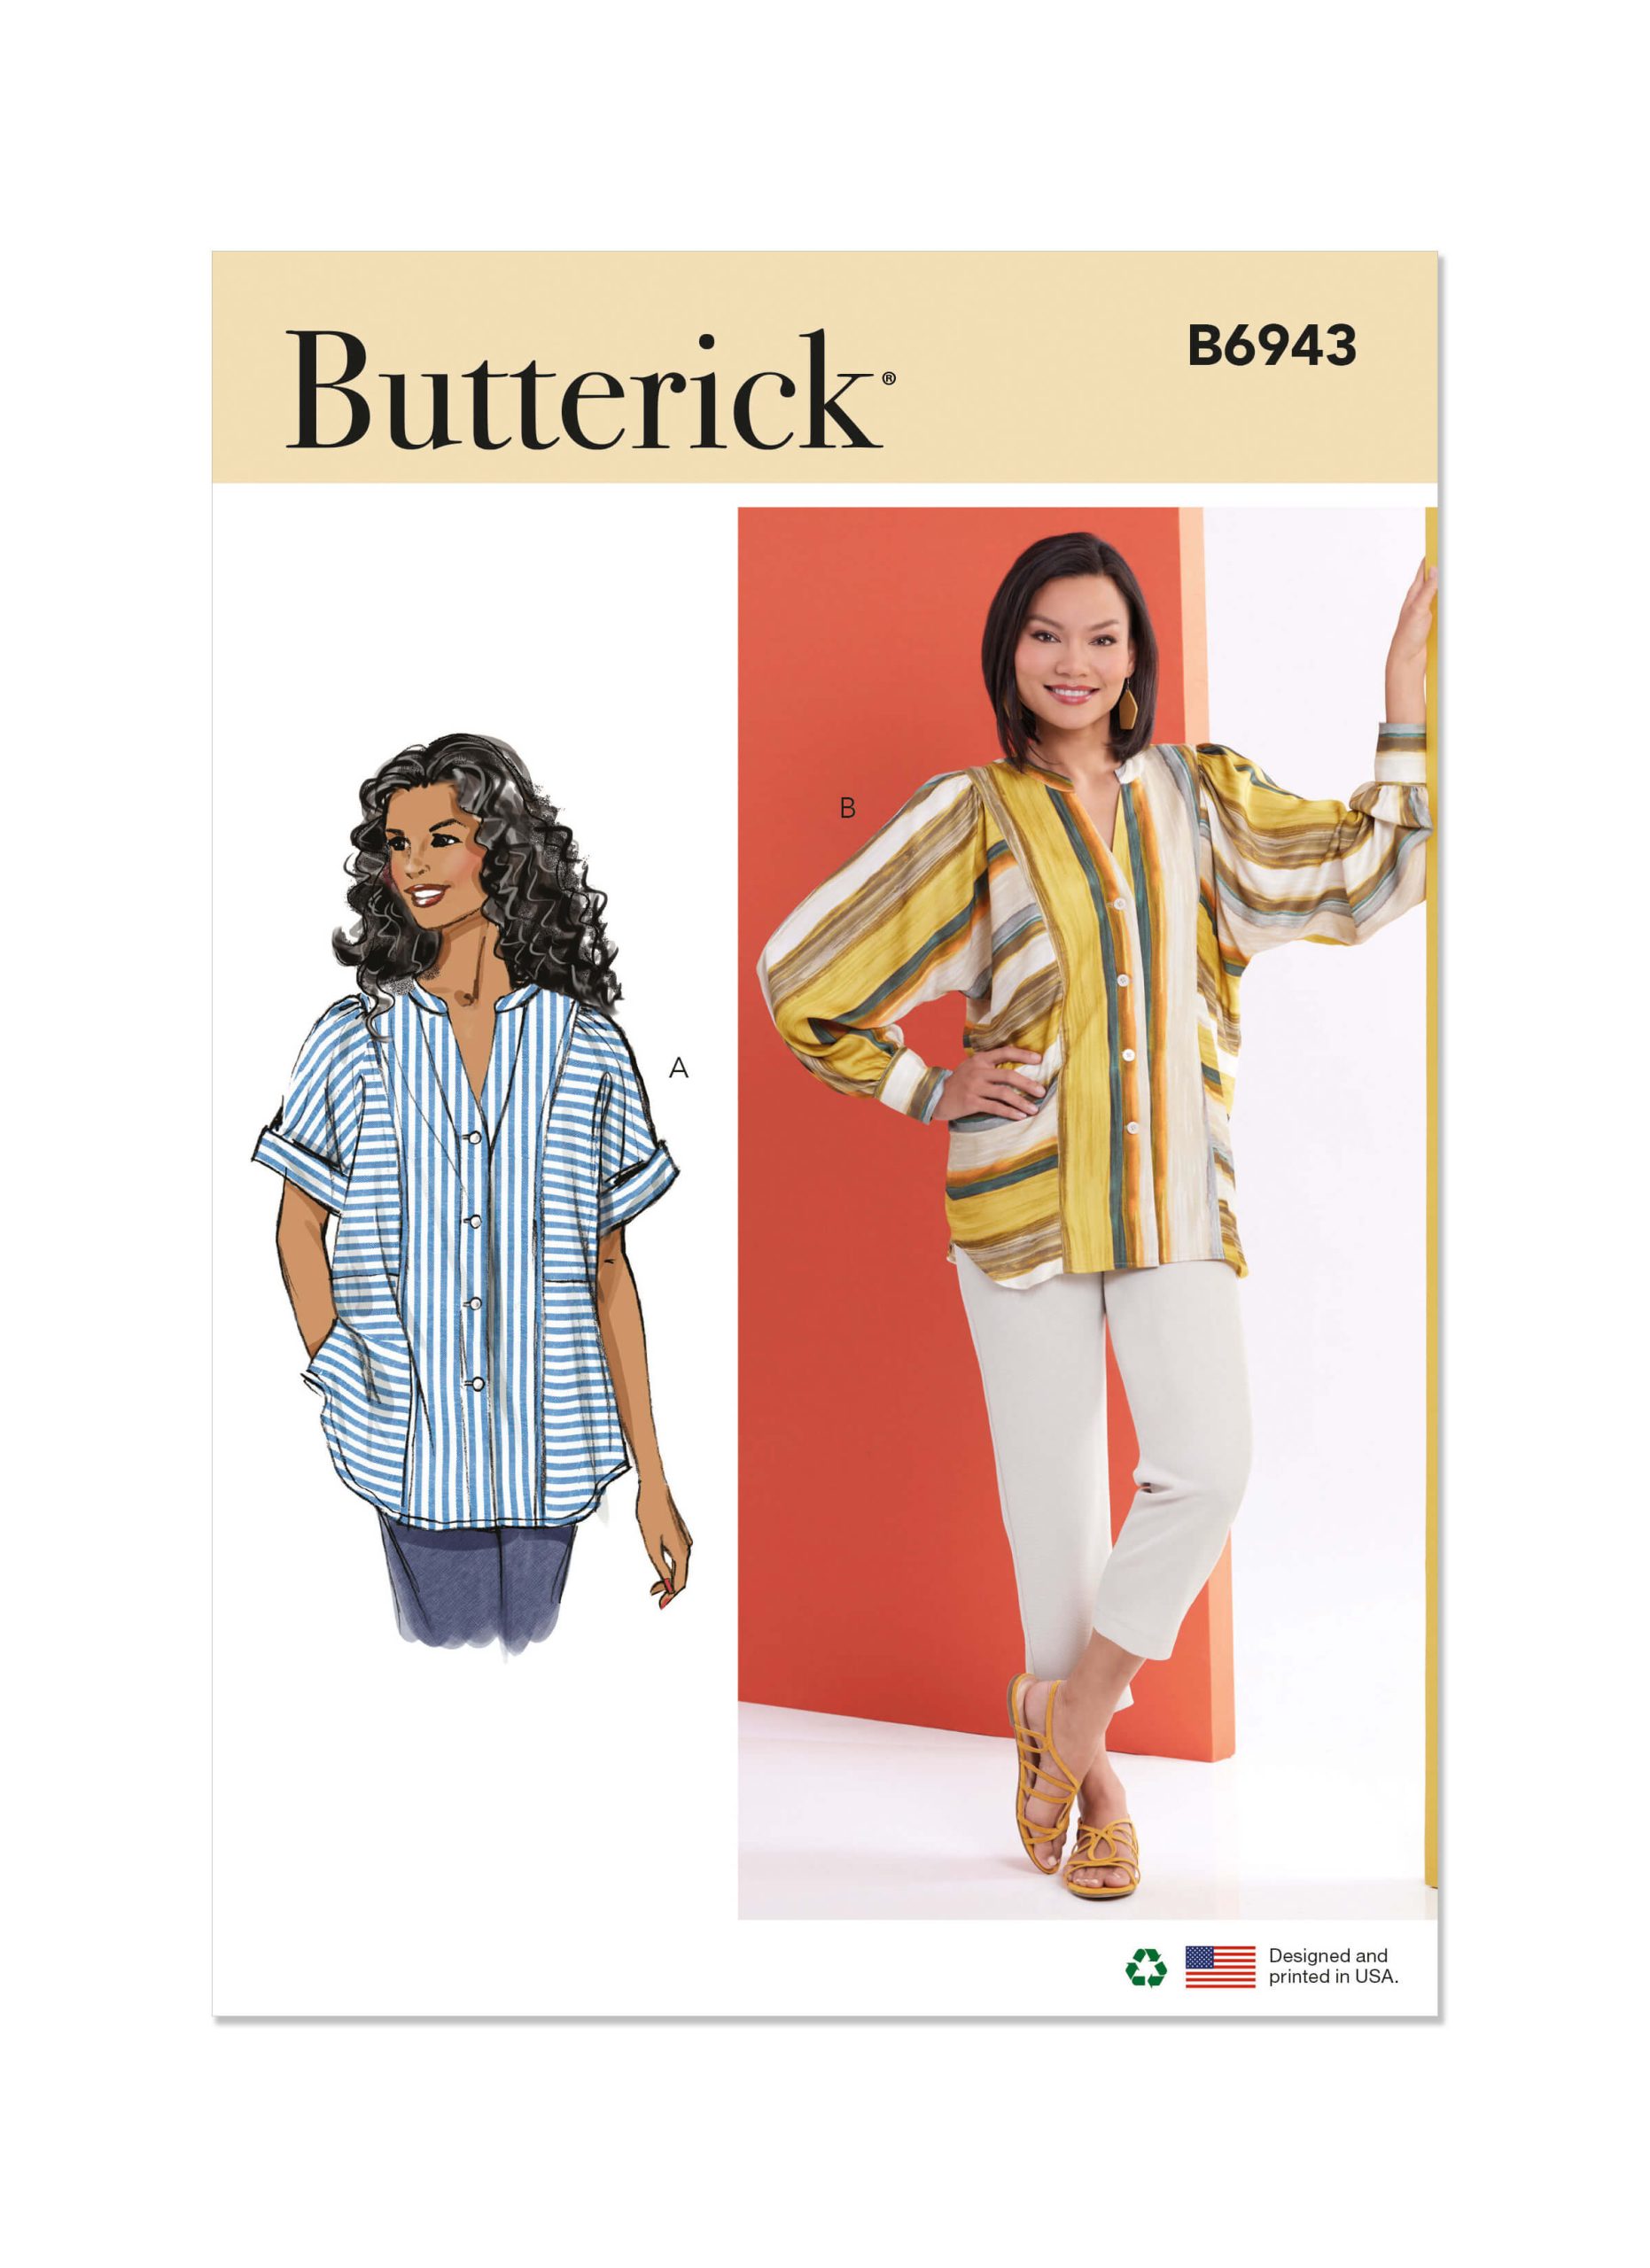 Butterick Sewing Pattern B6943 Misses' Top with Short or Long Sleeves